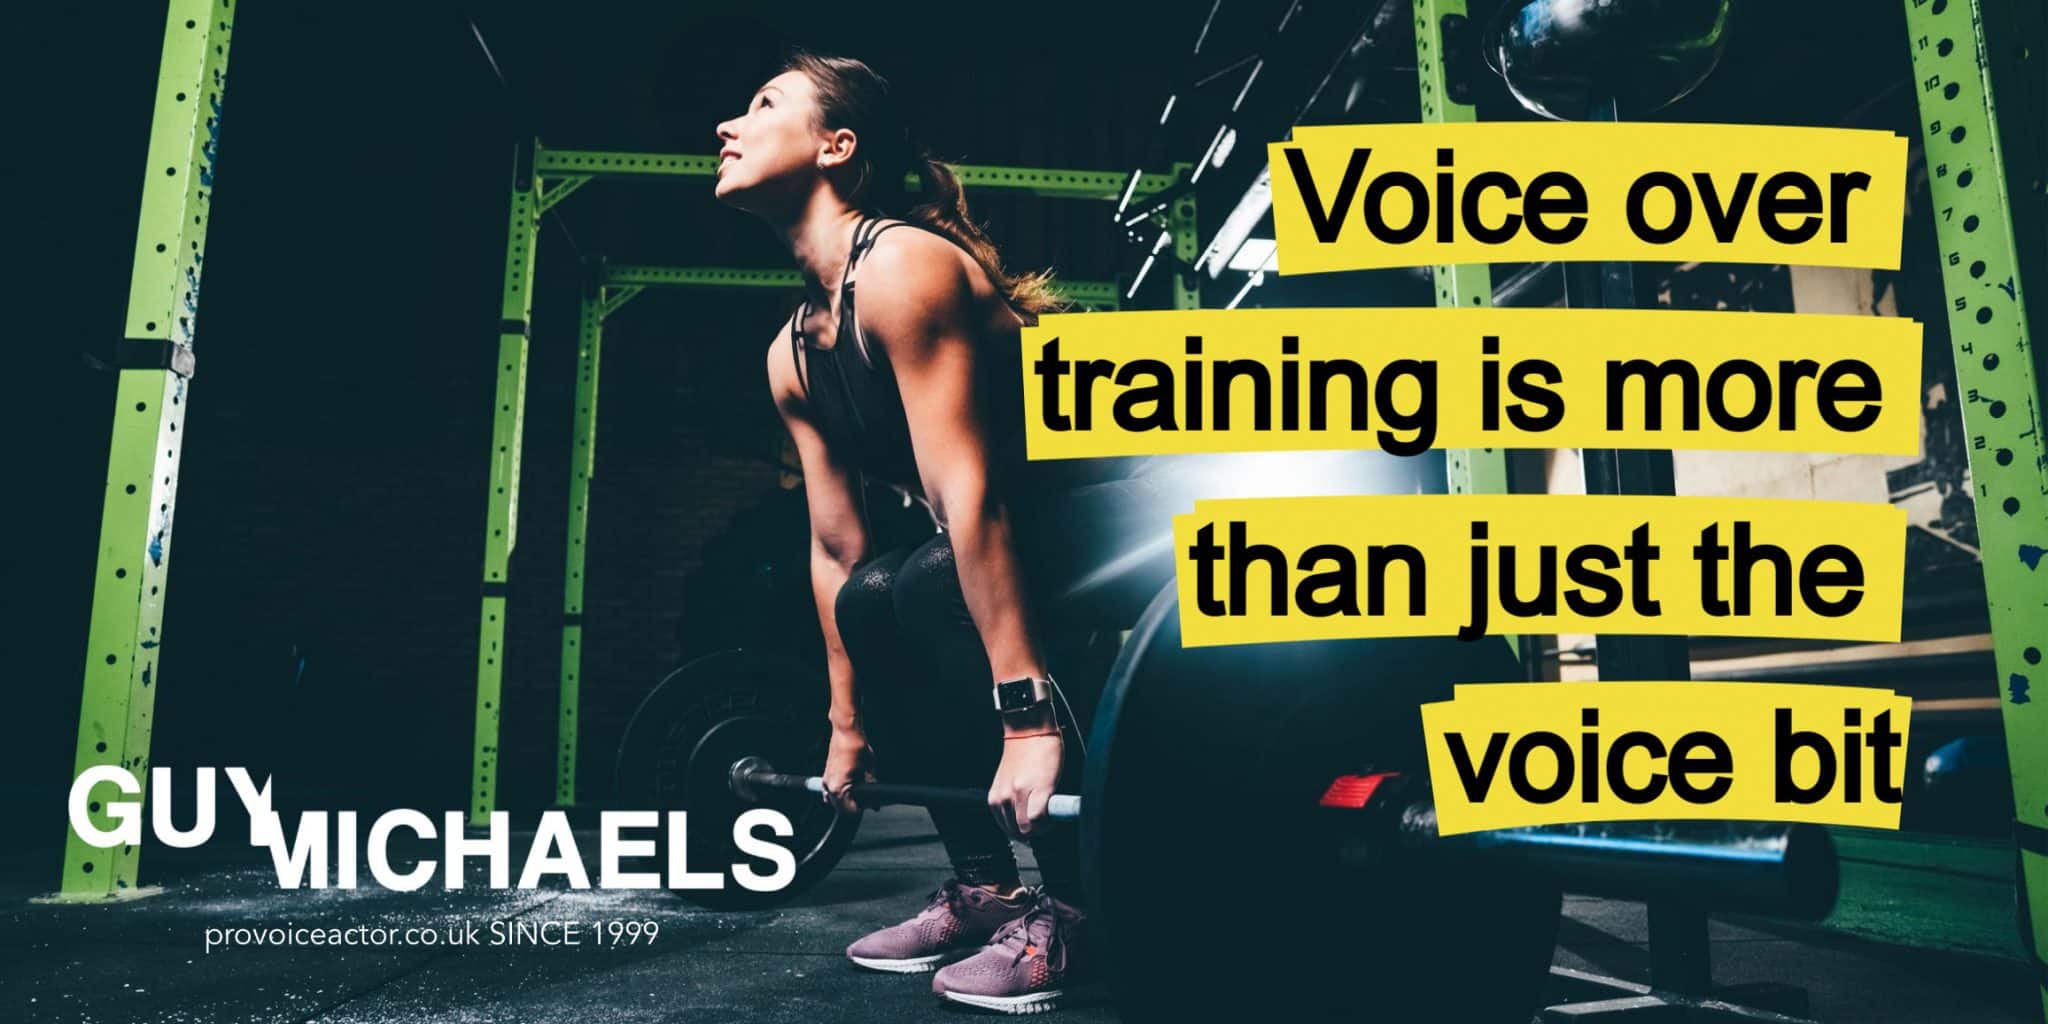 voice over training is more than just the voice bit